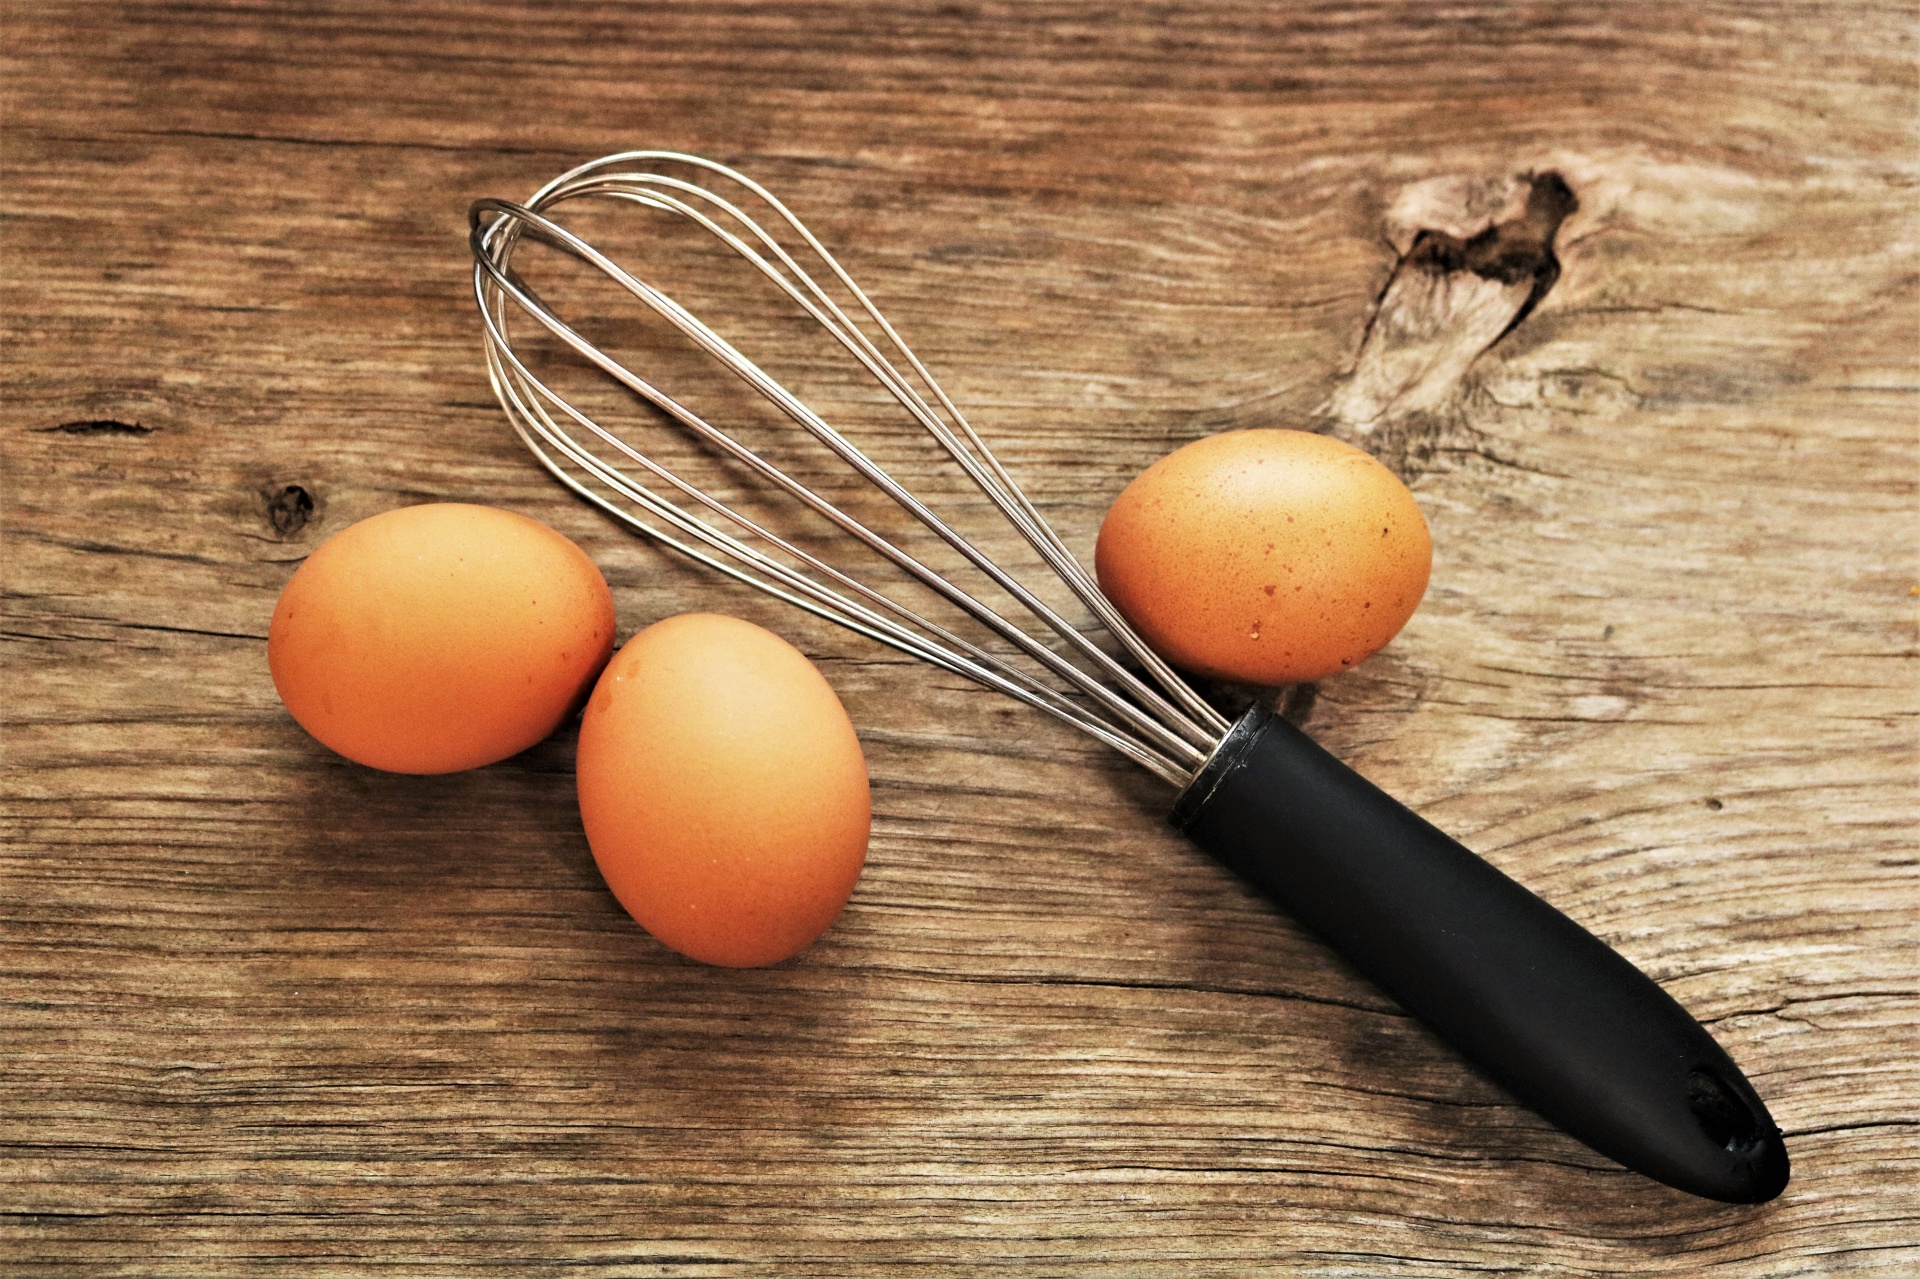 Eggs And Whisk On Wood Table